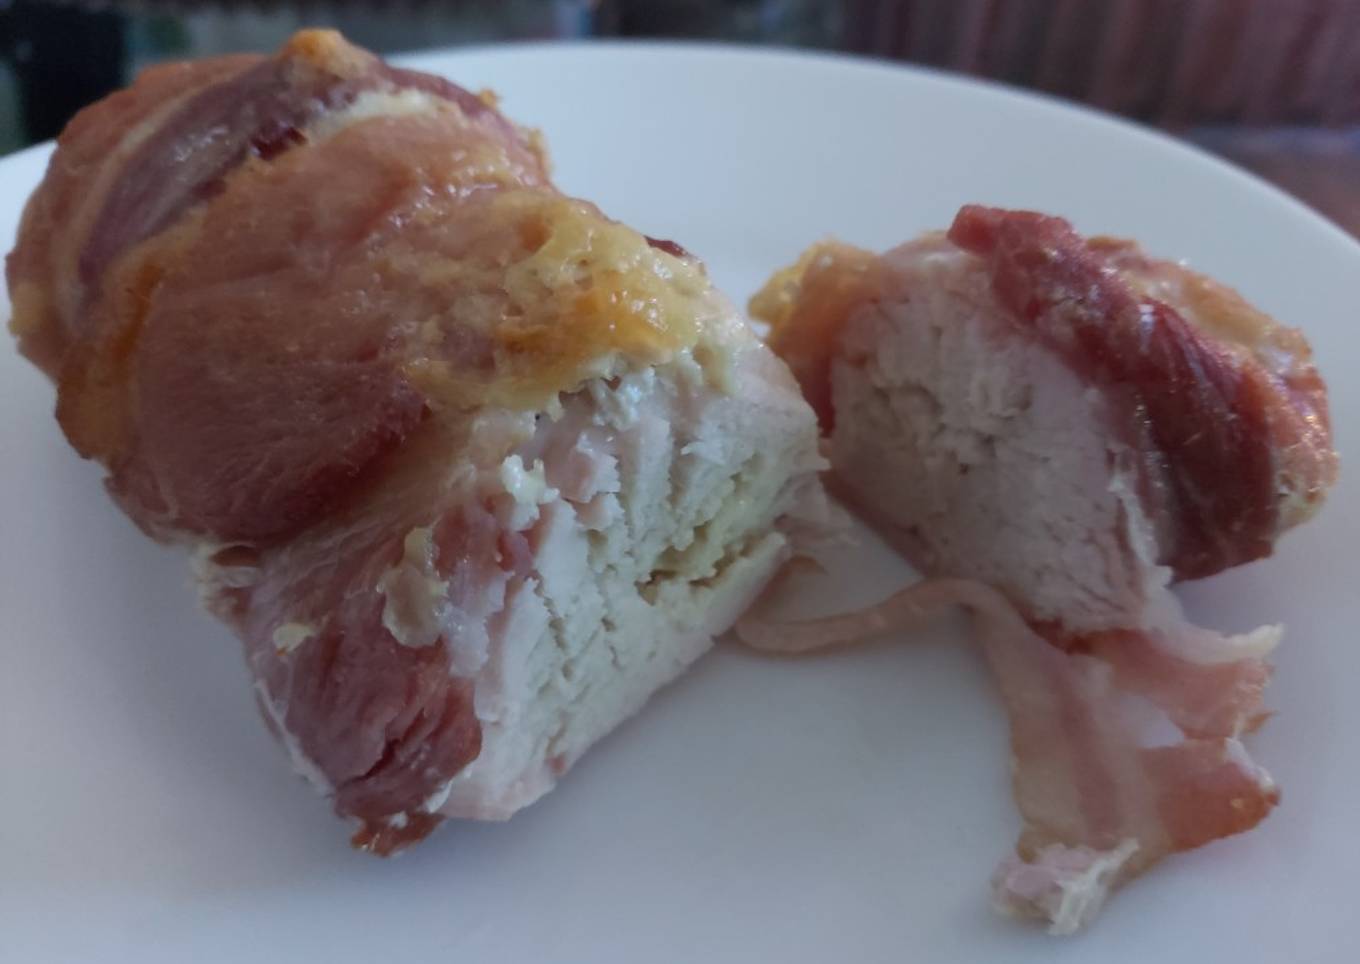 My Brie Stuffed Chicken Breast Wrapped in Bacon 😍